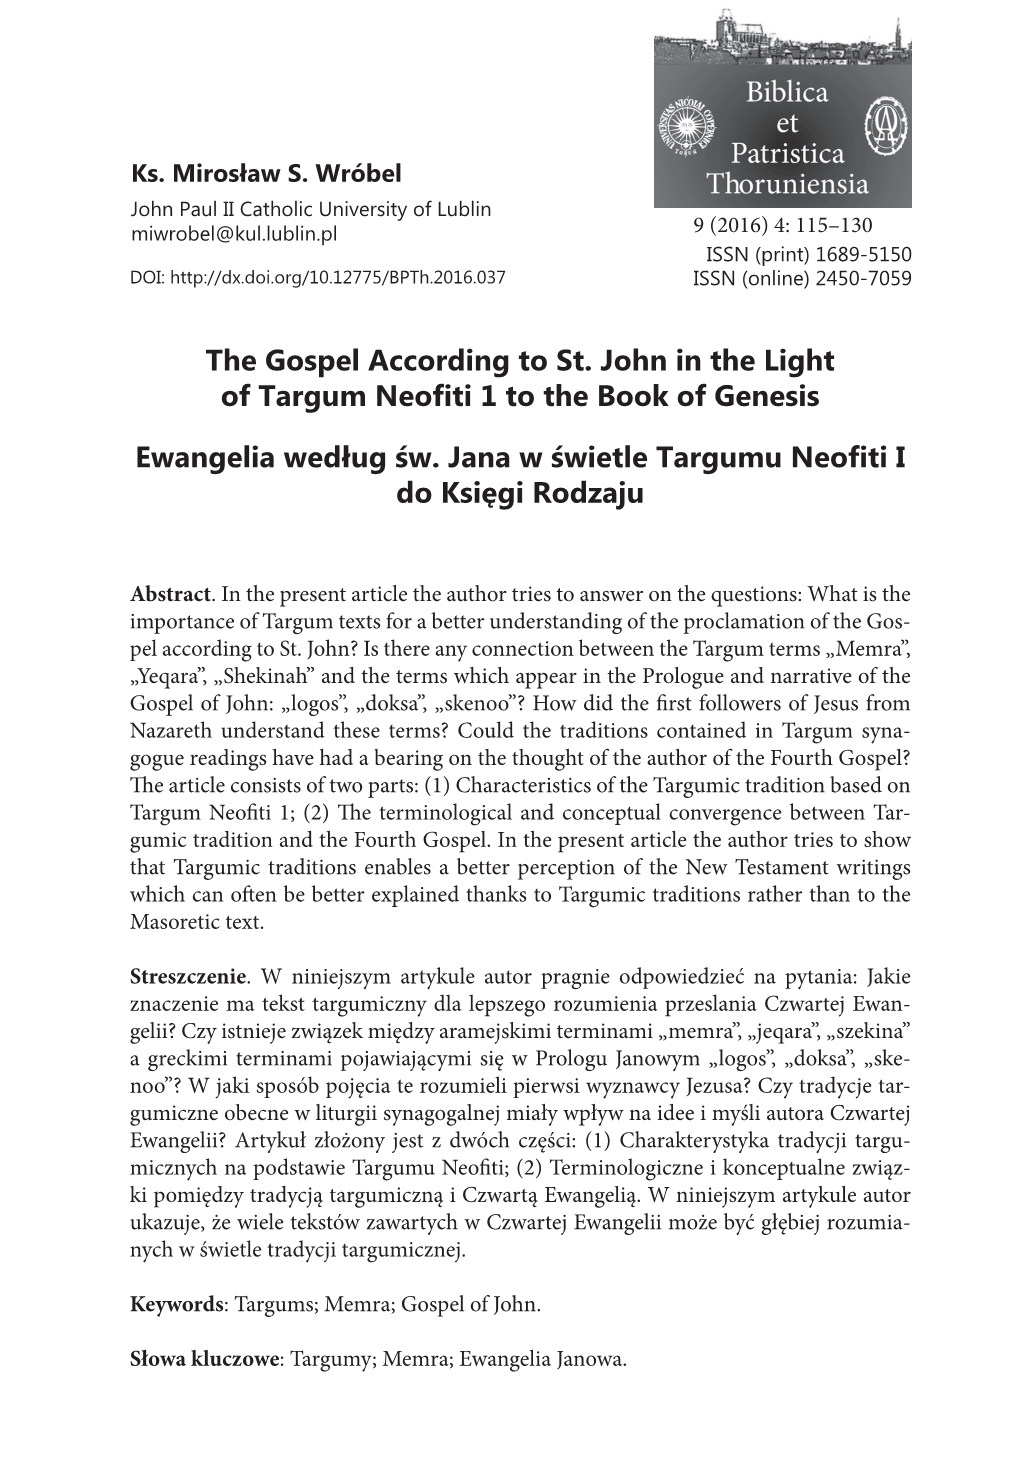 The Gospel According to St. John in the Light of Targum Neofiti 1 to the Book of Genesis